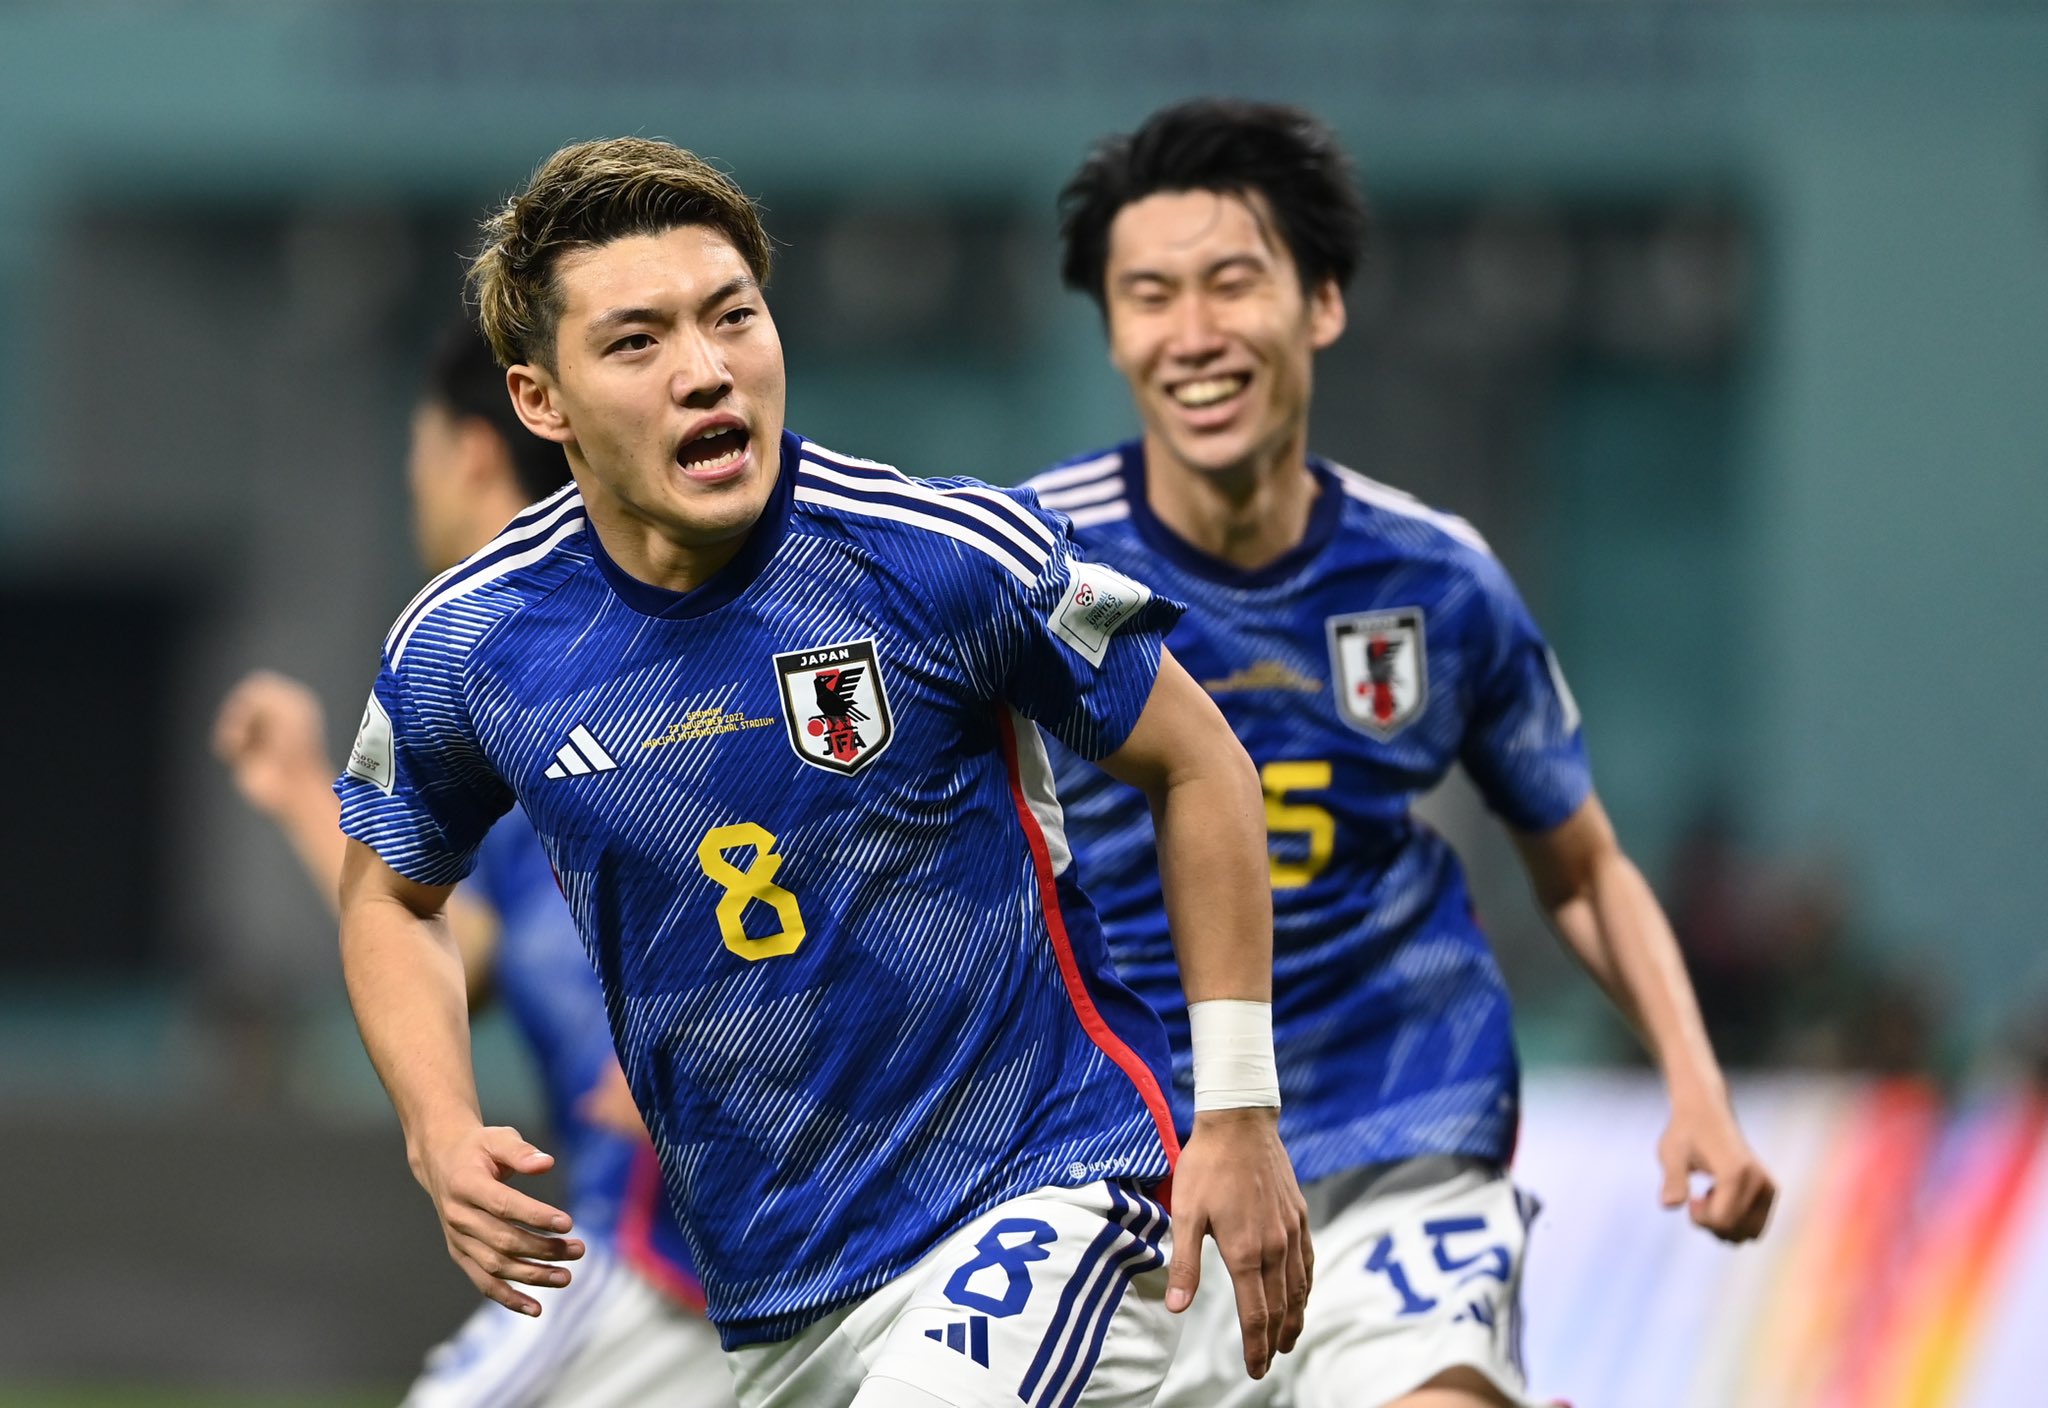 Qatar 2022: Another Upset As Japan Claim 2-1 Win Vs Germany